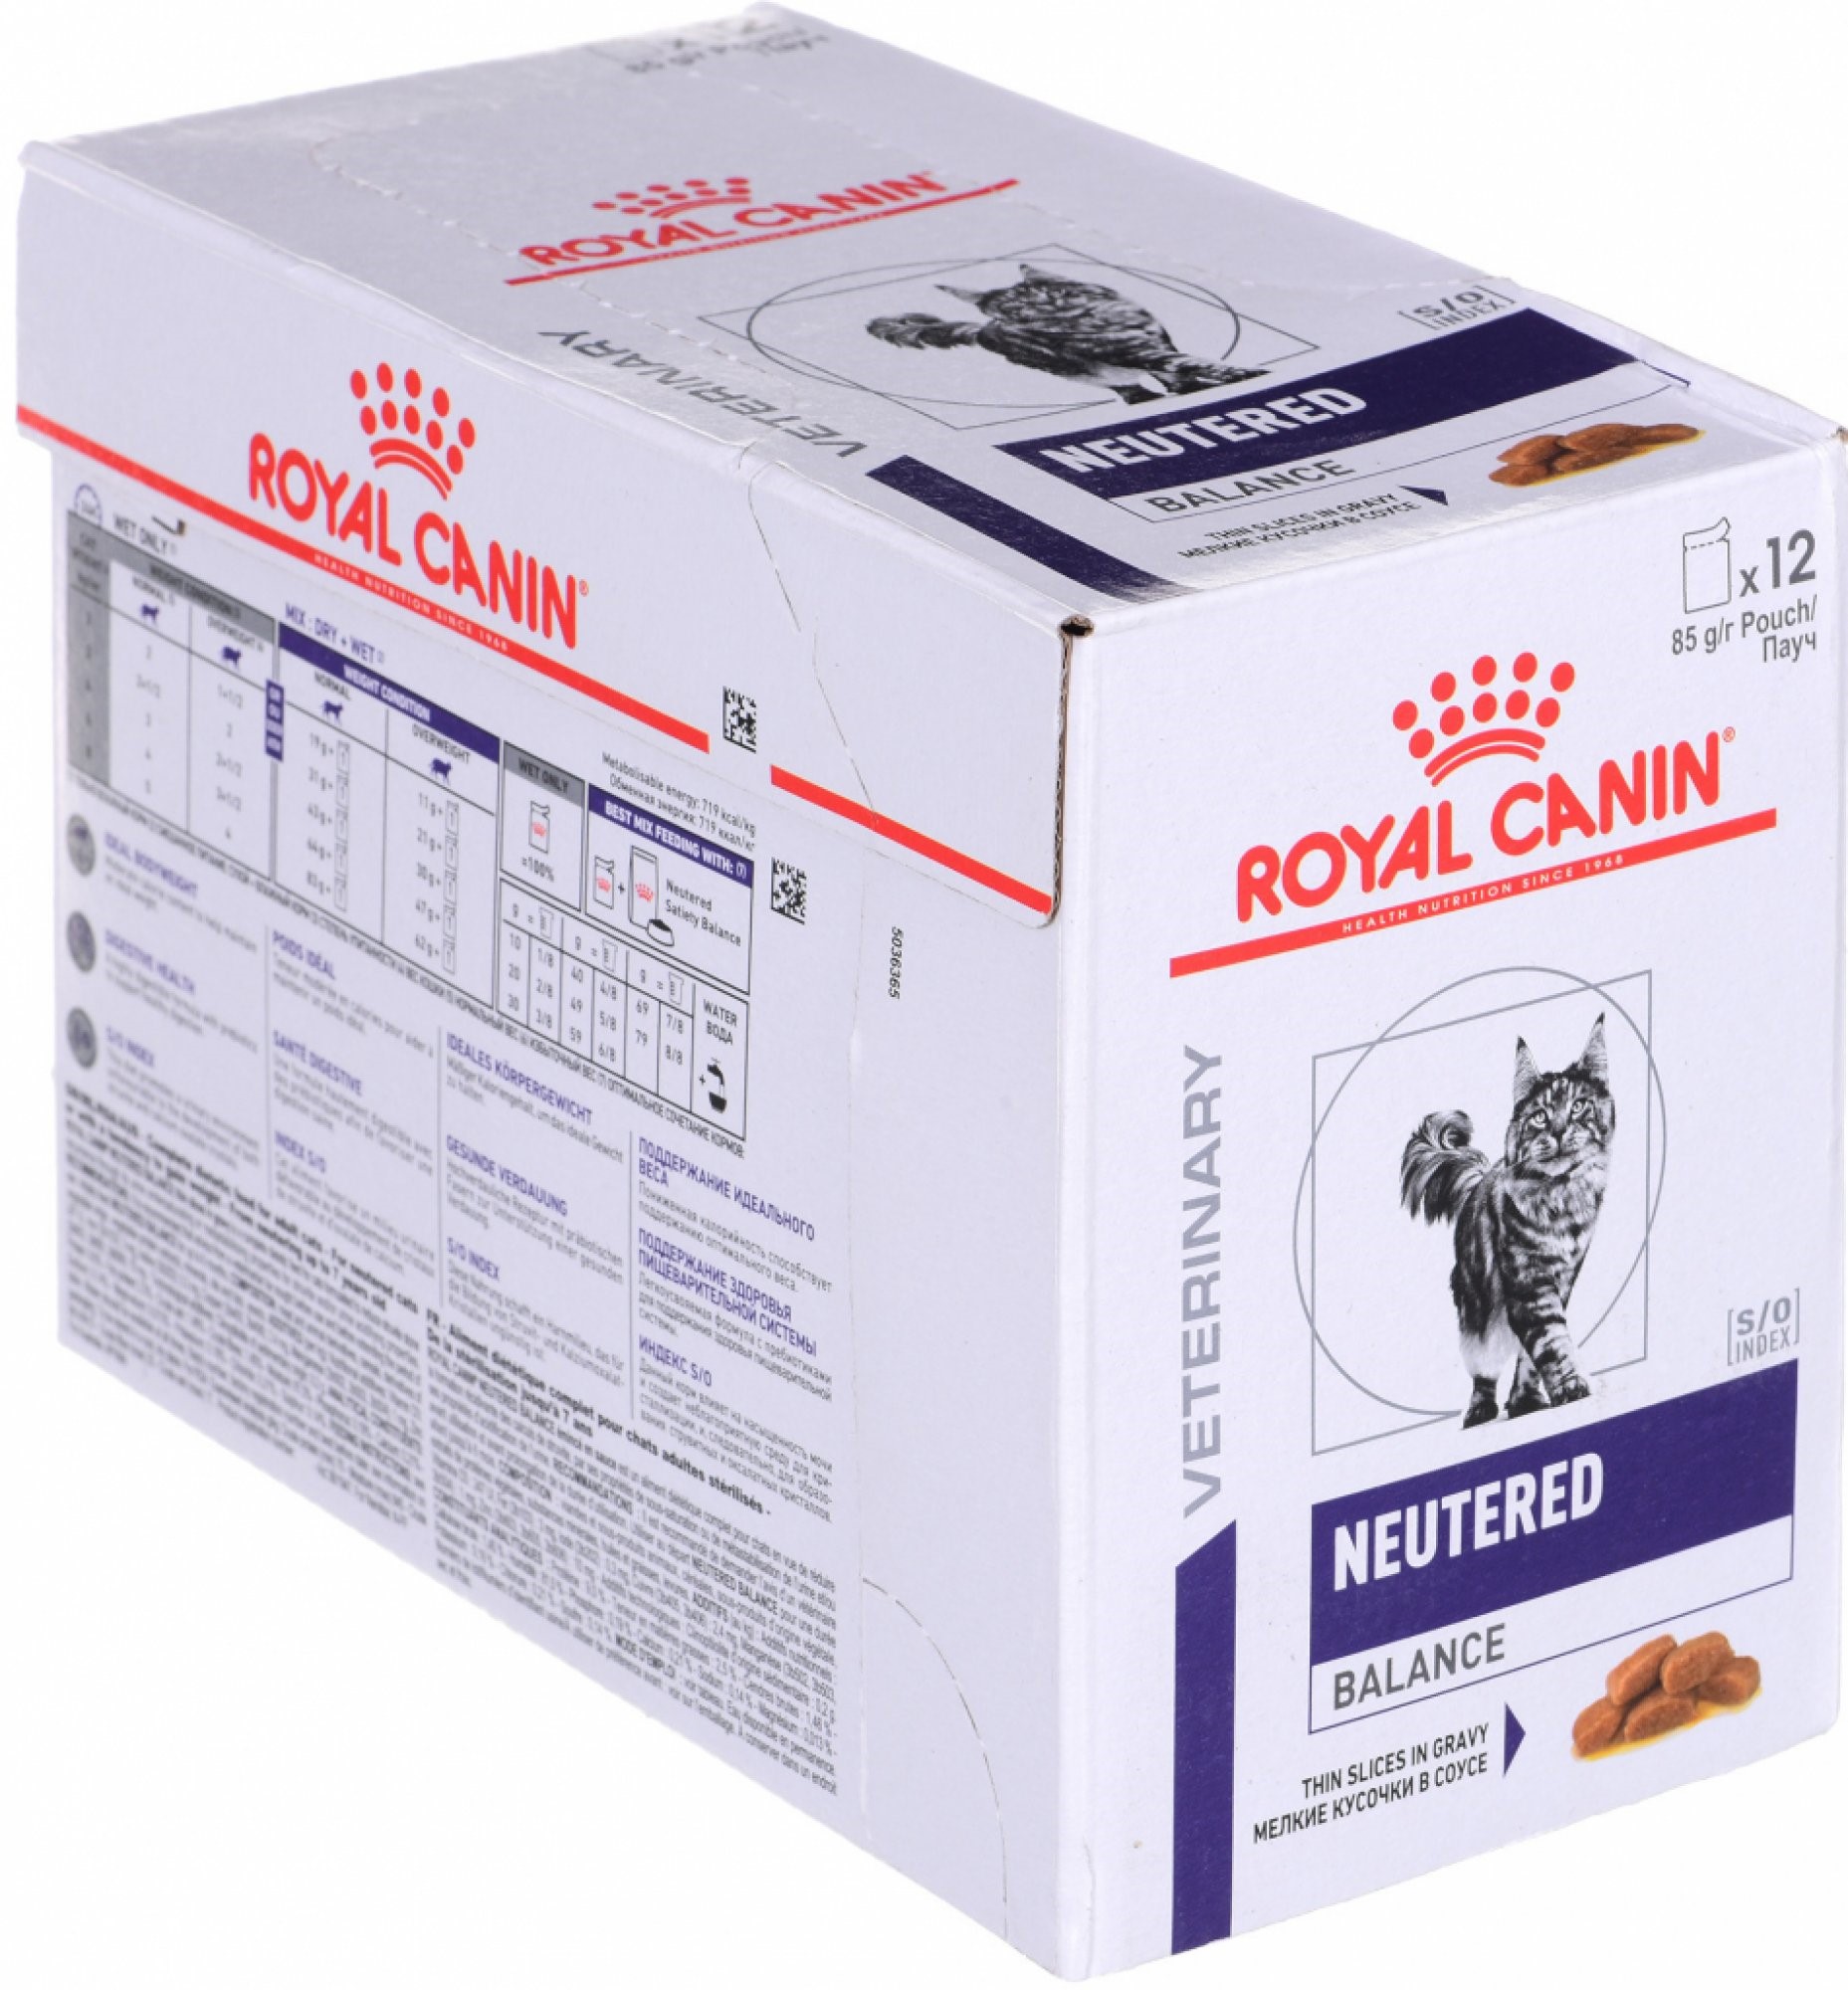 Royal Canin - After neutering, cats tend to gain some weight. Keep